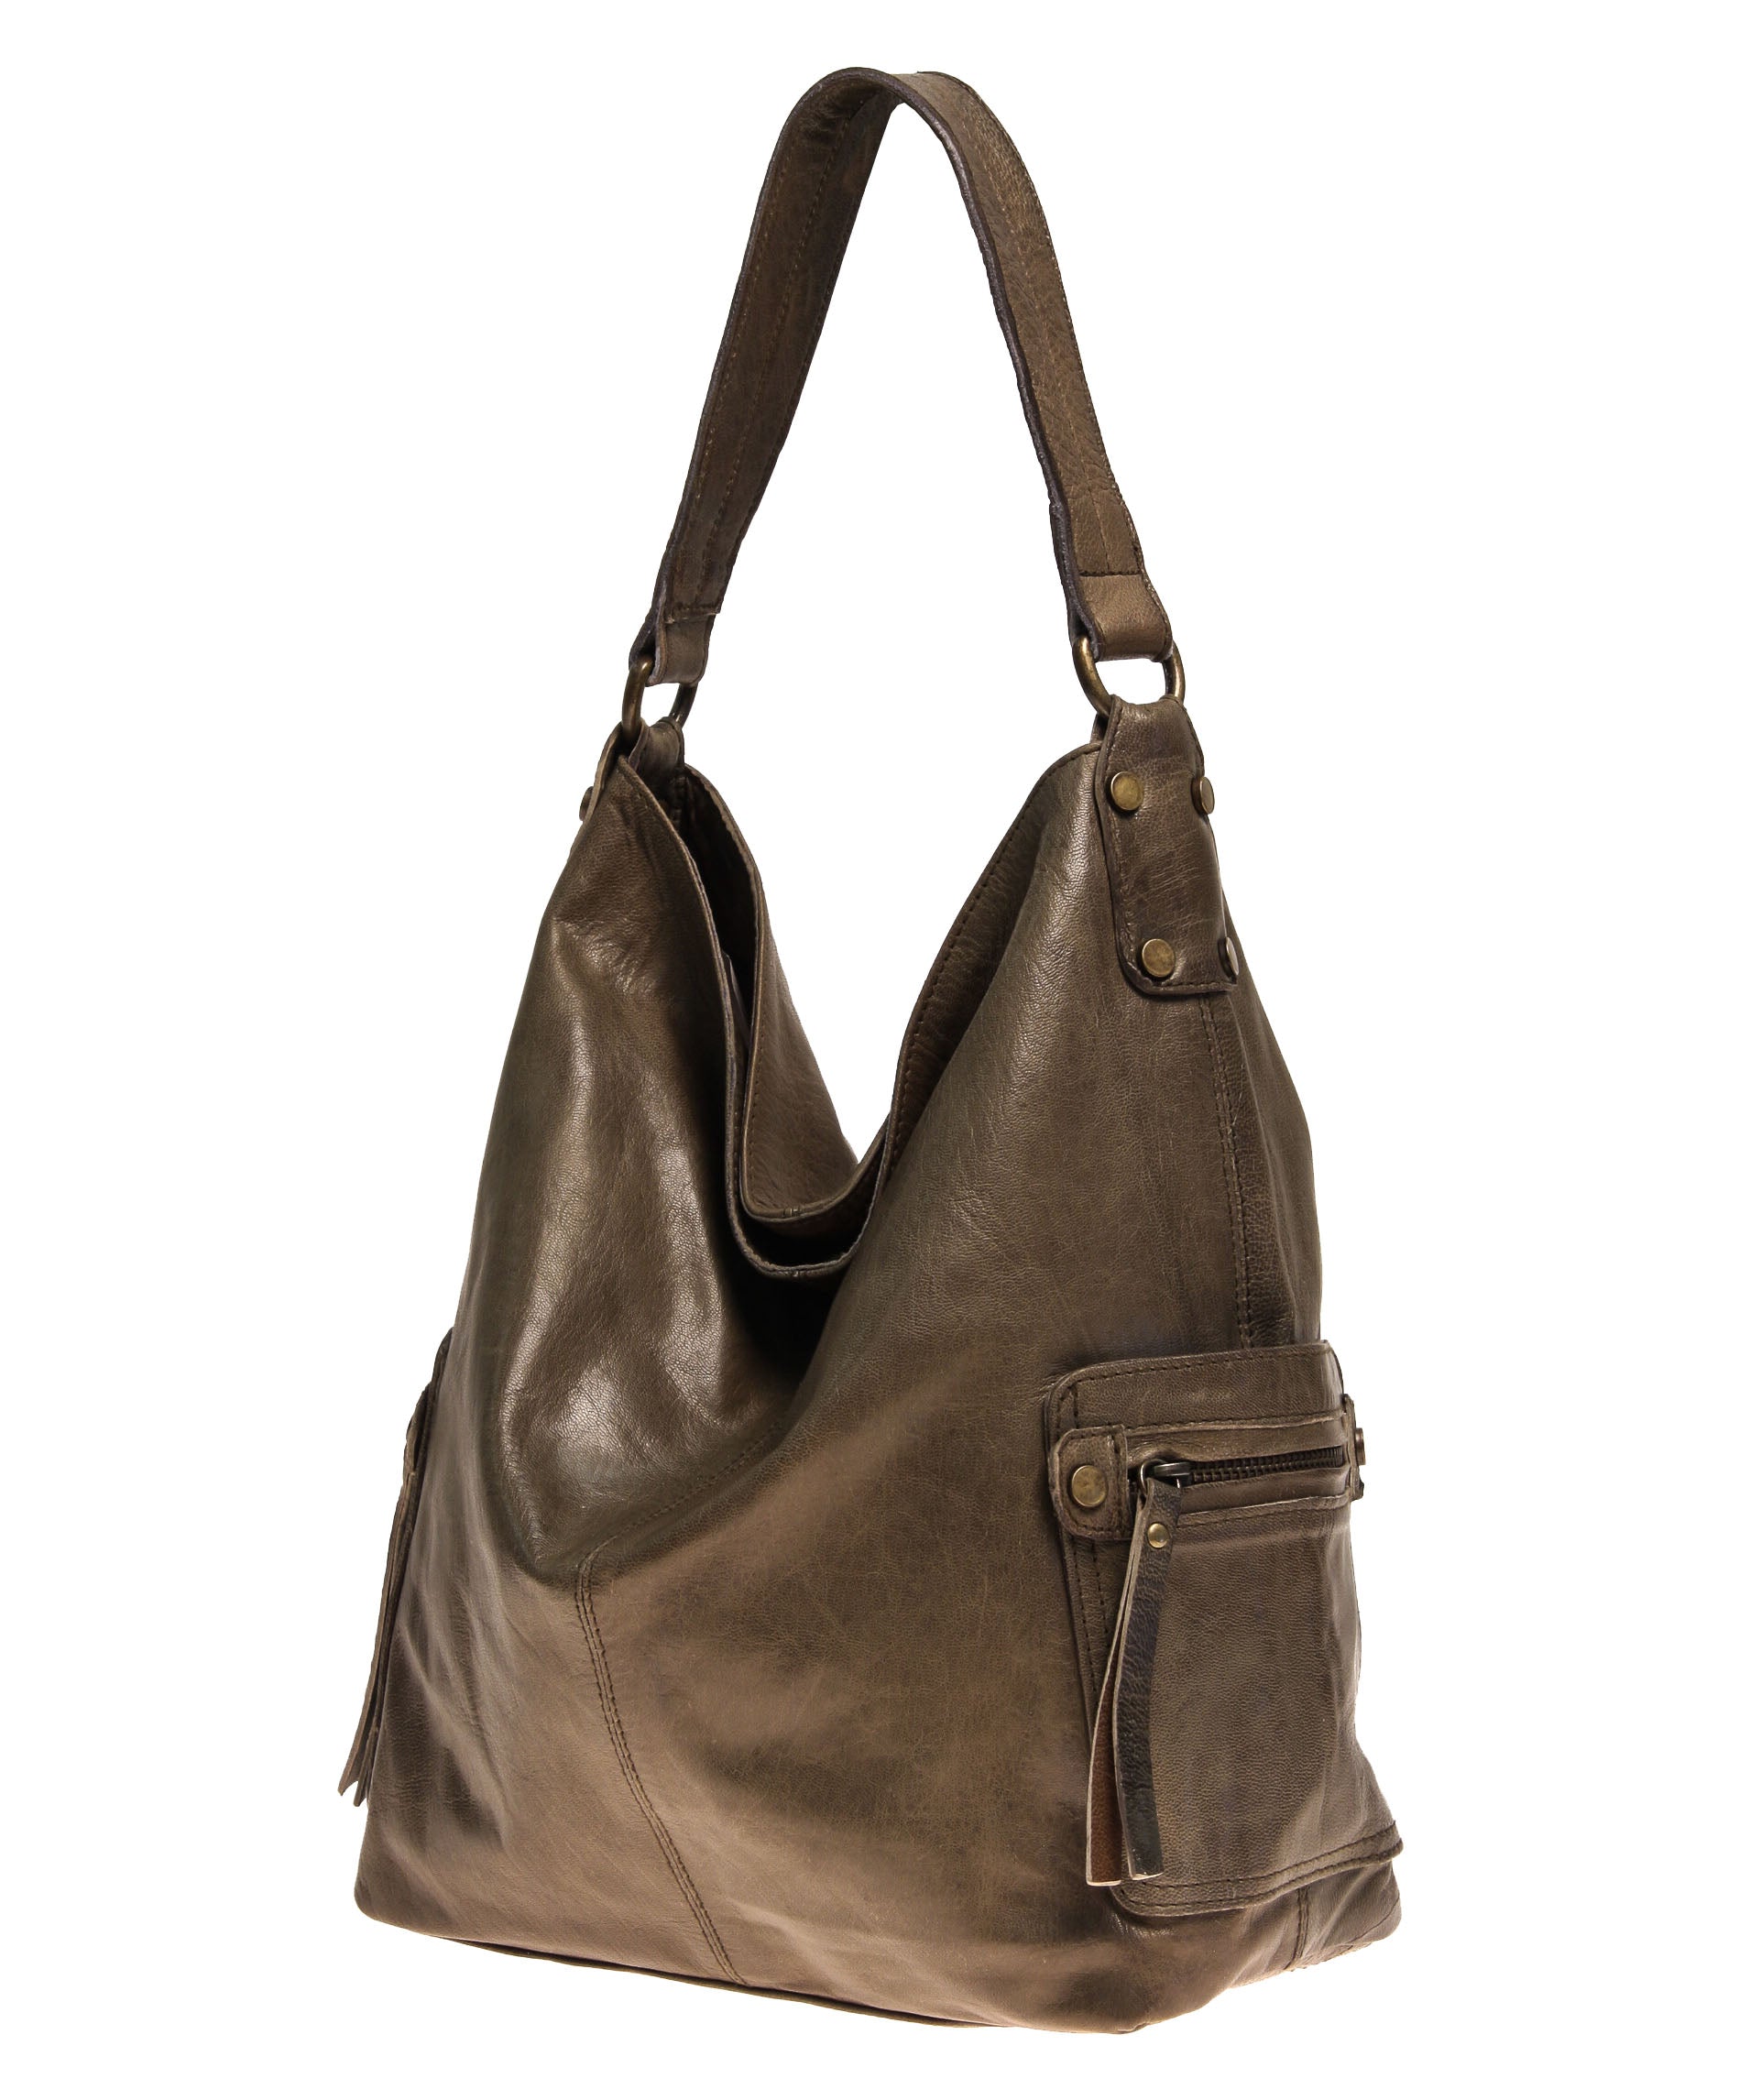 TANO BOOGIE BUCKET BAG ~RICH PEBBLED BROWN LEATHER ~ EUC | eBay